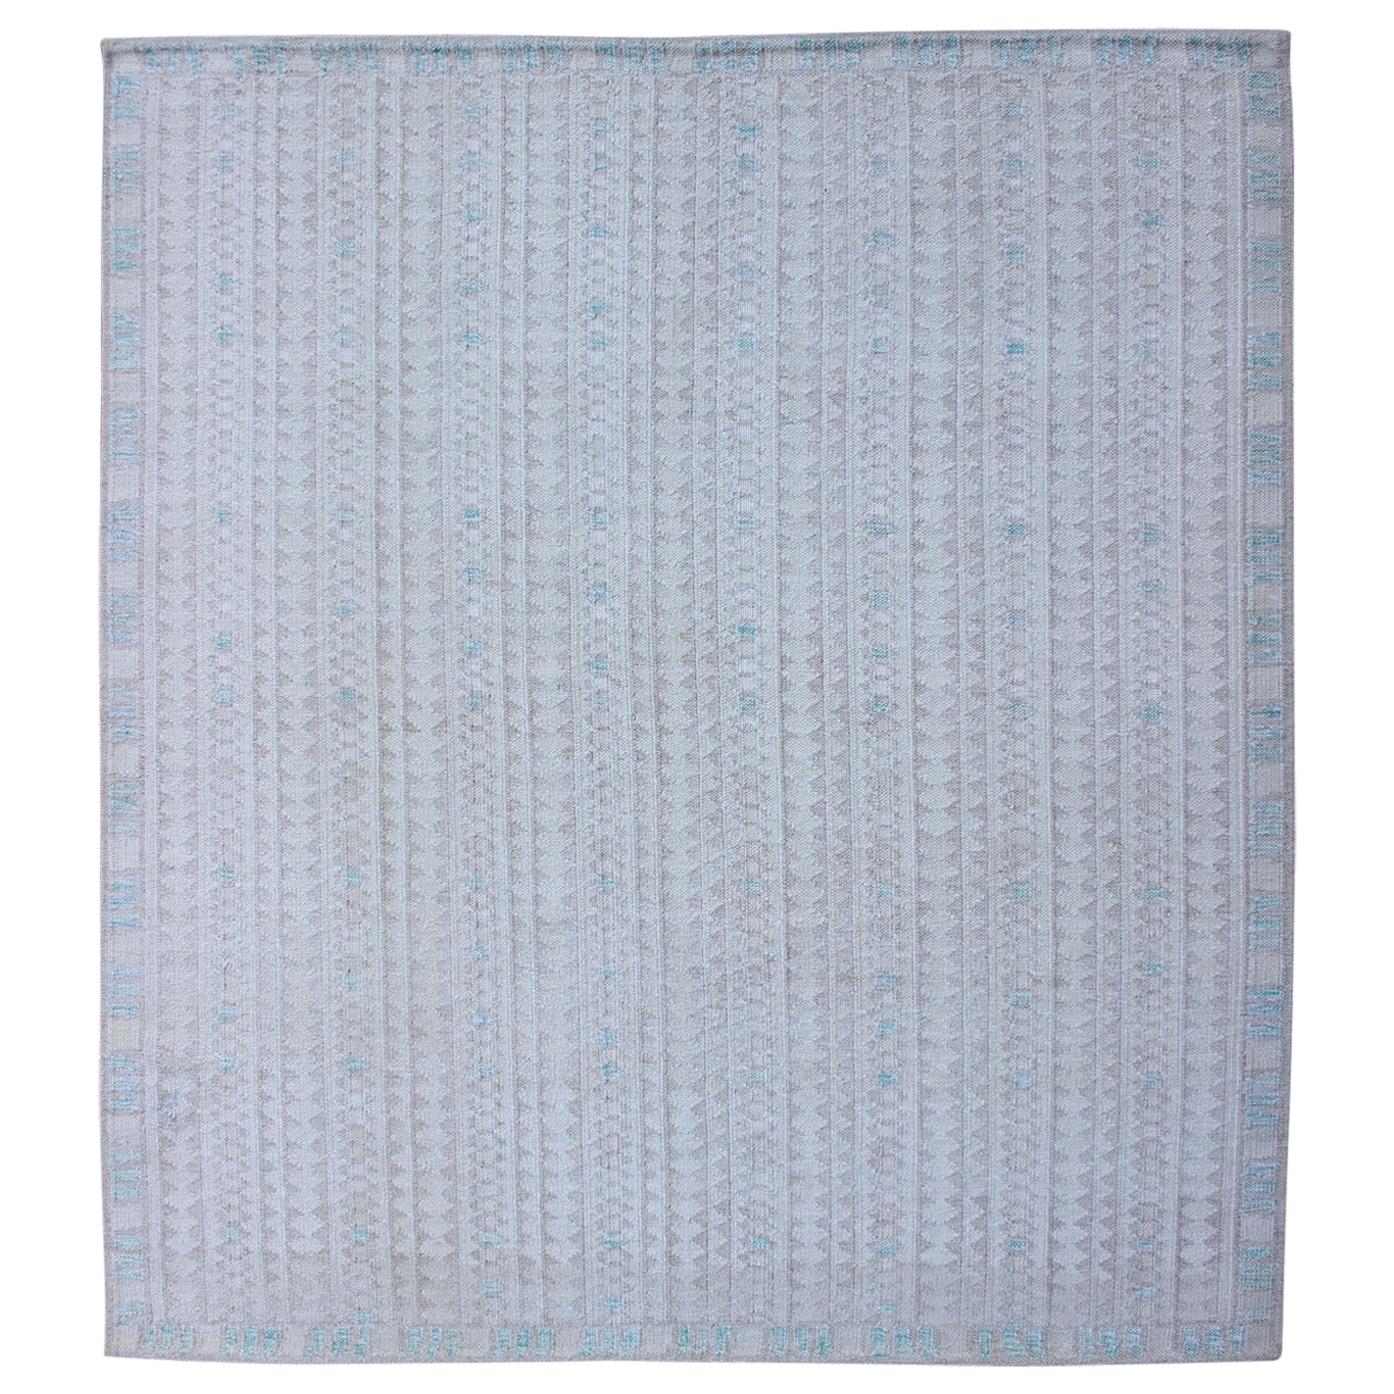 Modern Swedish Design Rug with All-Over Design in White, Taupe & Light Blue